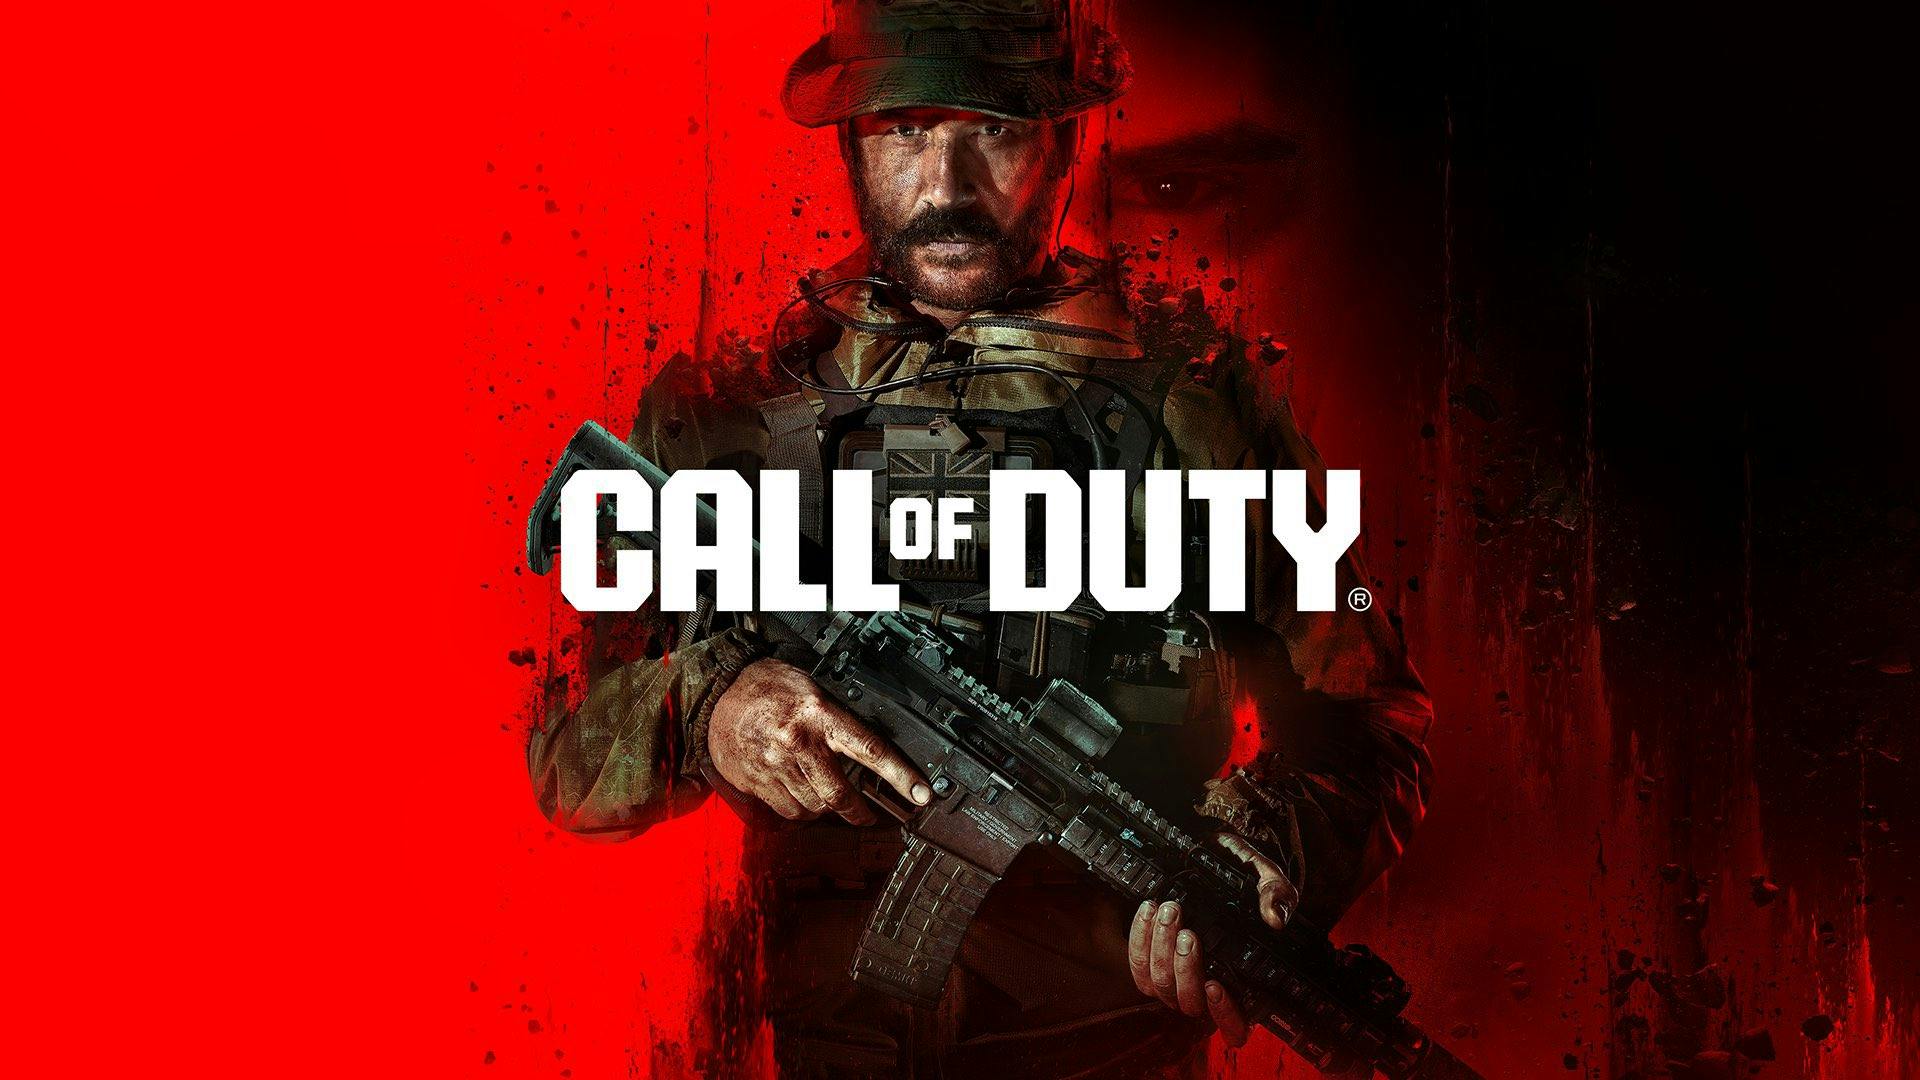 Modern Warfare 3 Is The Worst-Rated Mainline Call of Duty On Metacritic